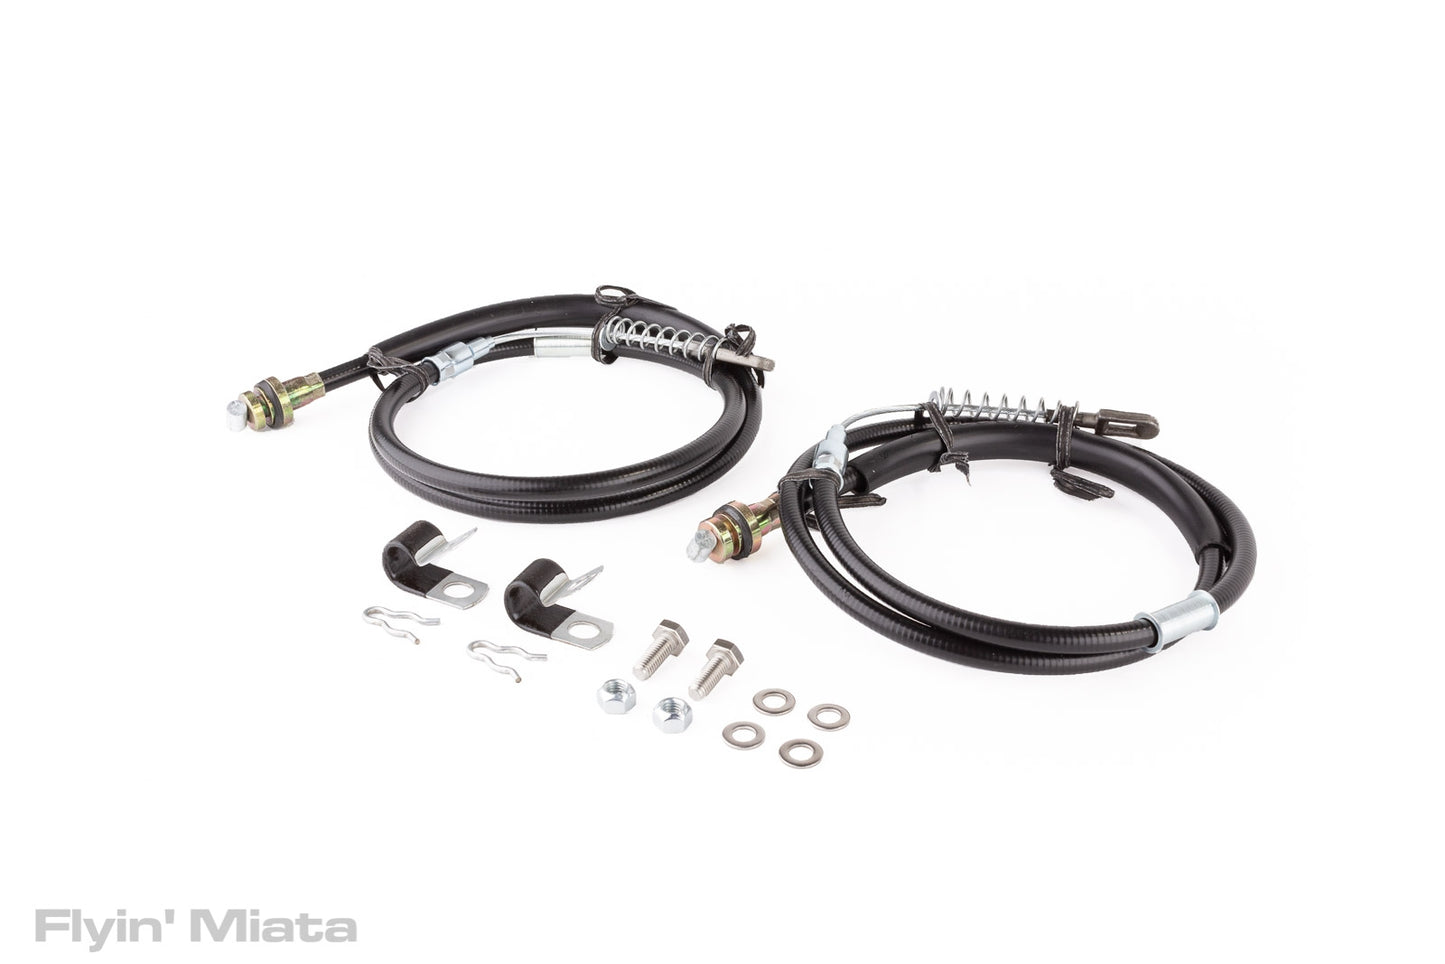 Replacement parking brake cables for Wilwood calipers